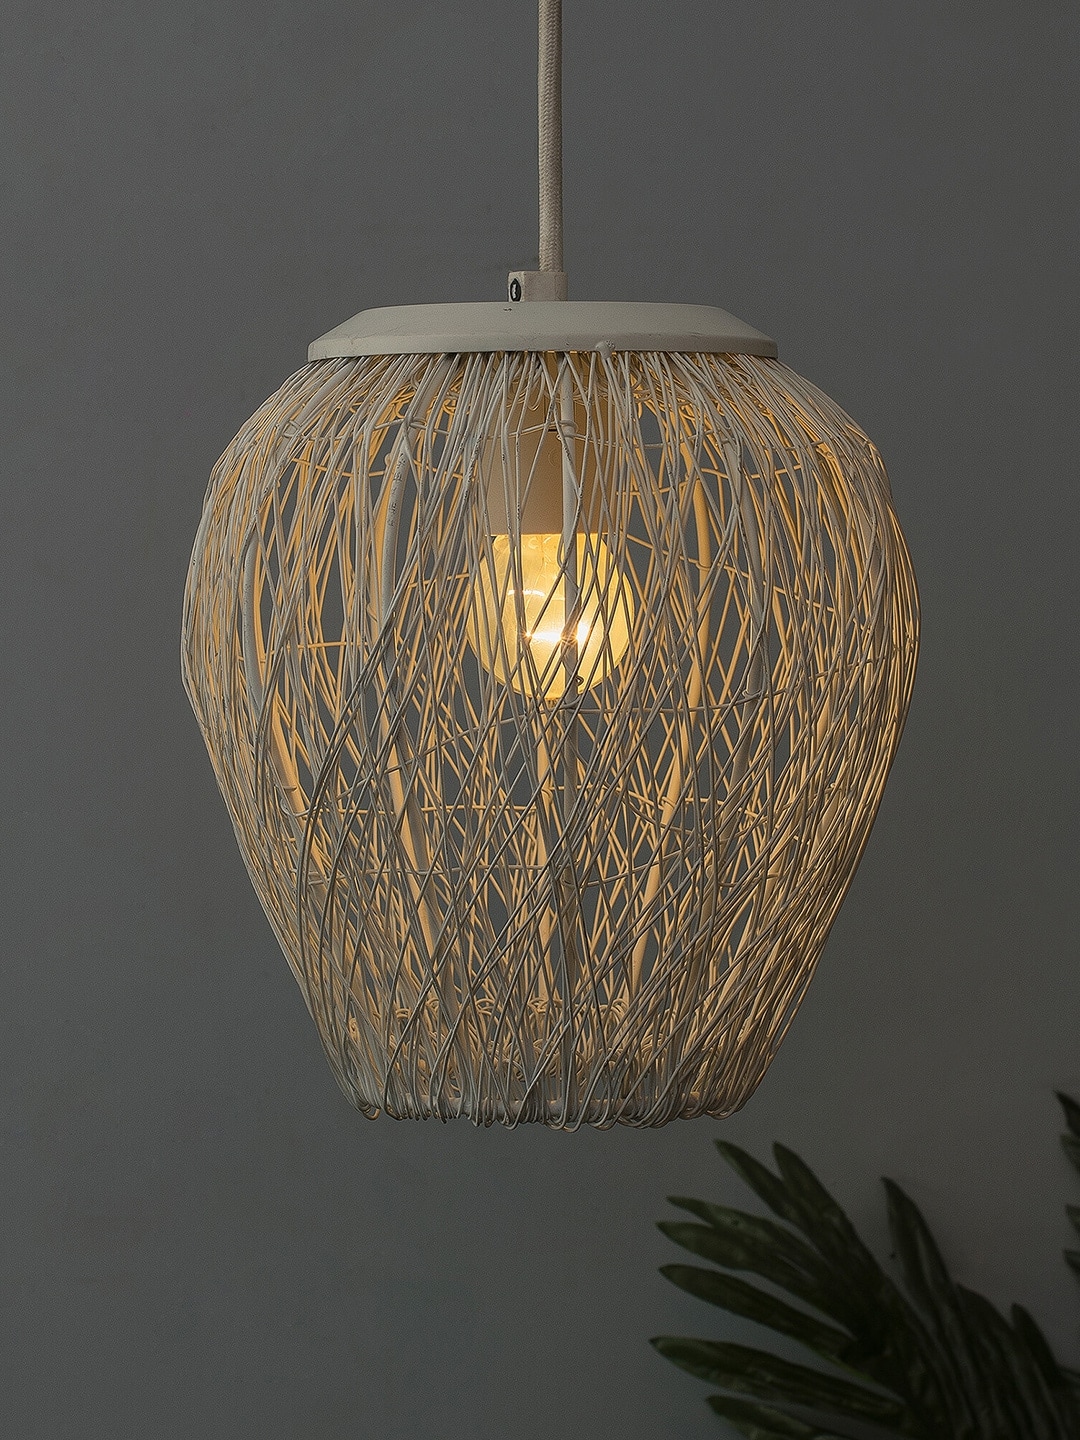 Homesake Grey Textured Steel Wire Mesh Handcrafted Pendent Lamp Price in India